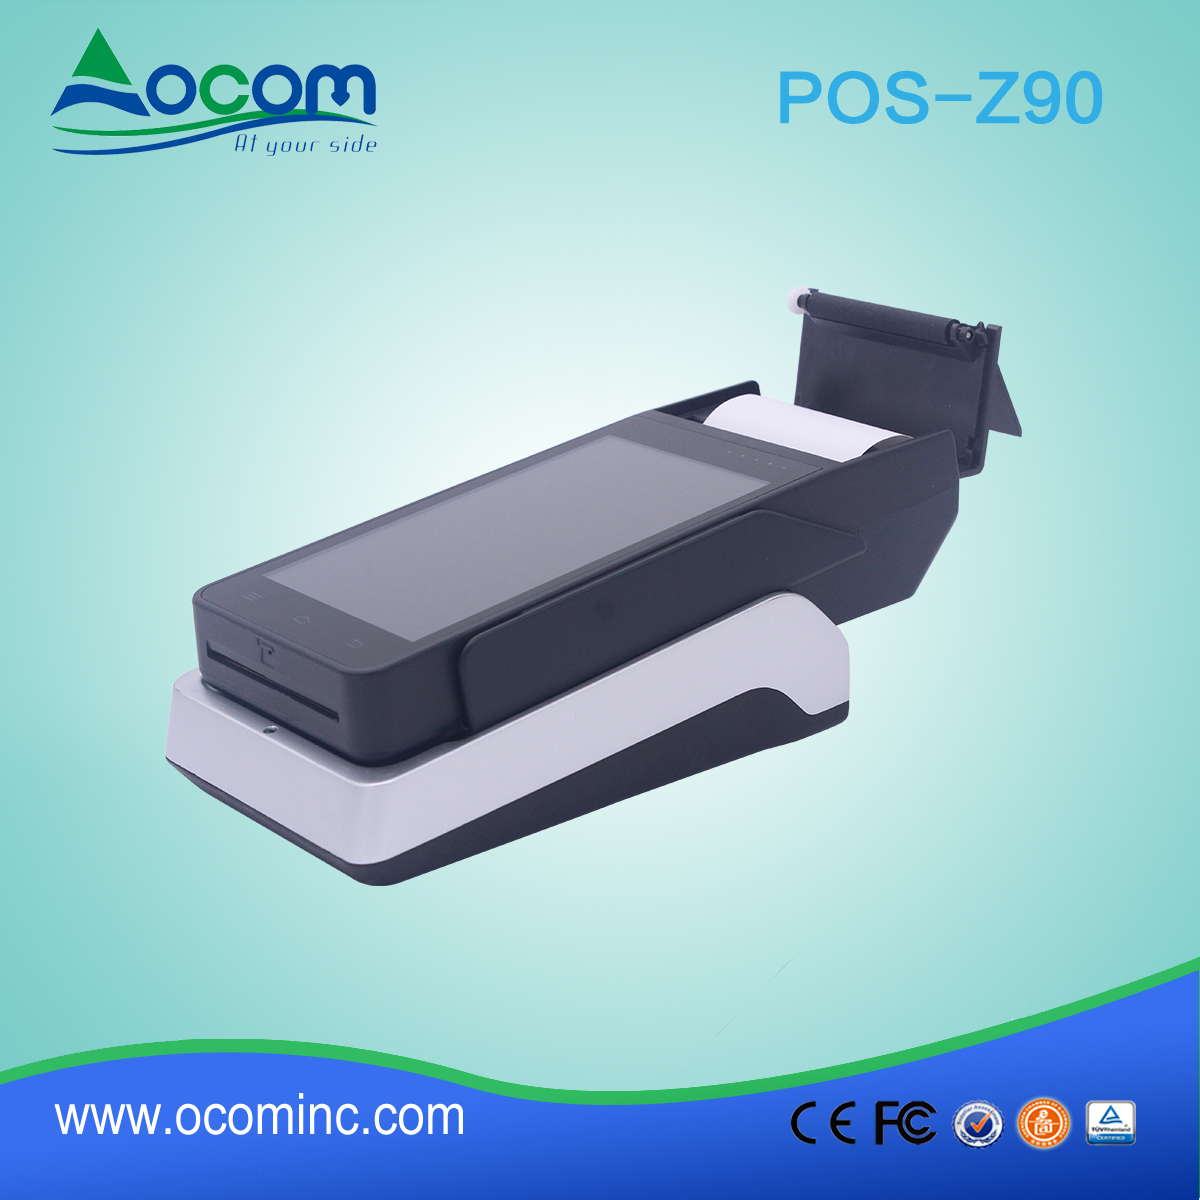 New design portable POS payment machine with 58mm printer built in (POS-Z90)